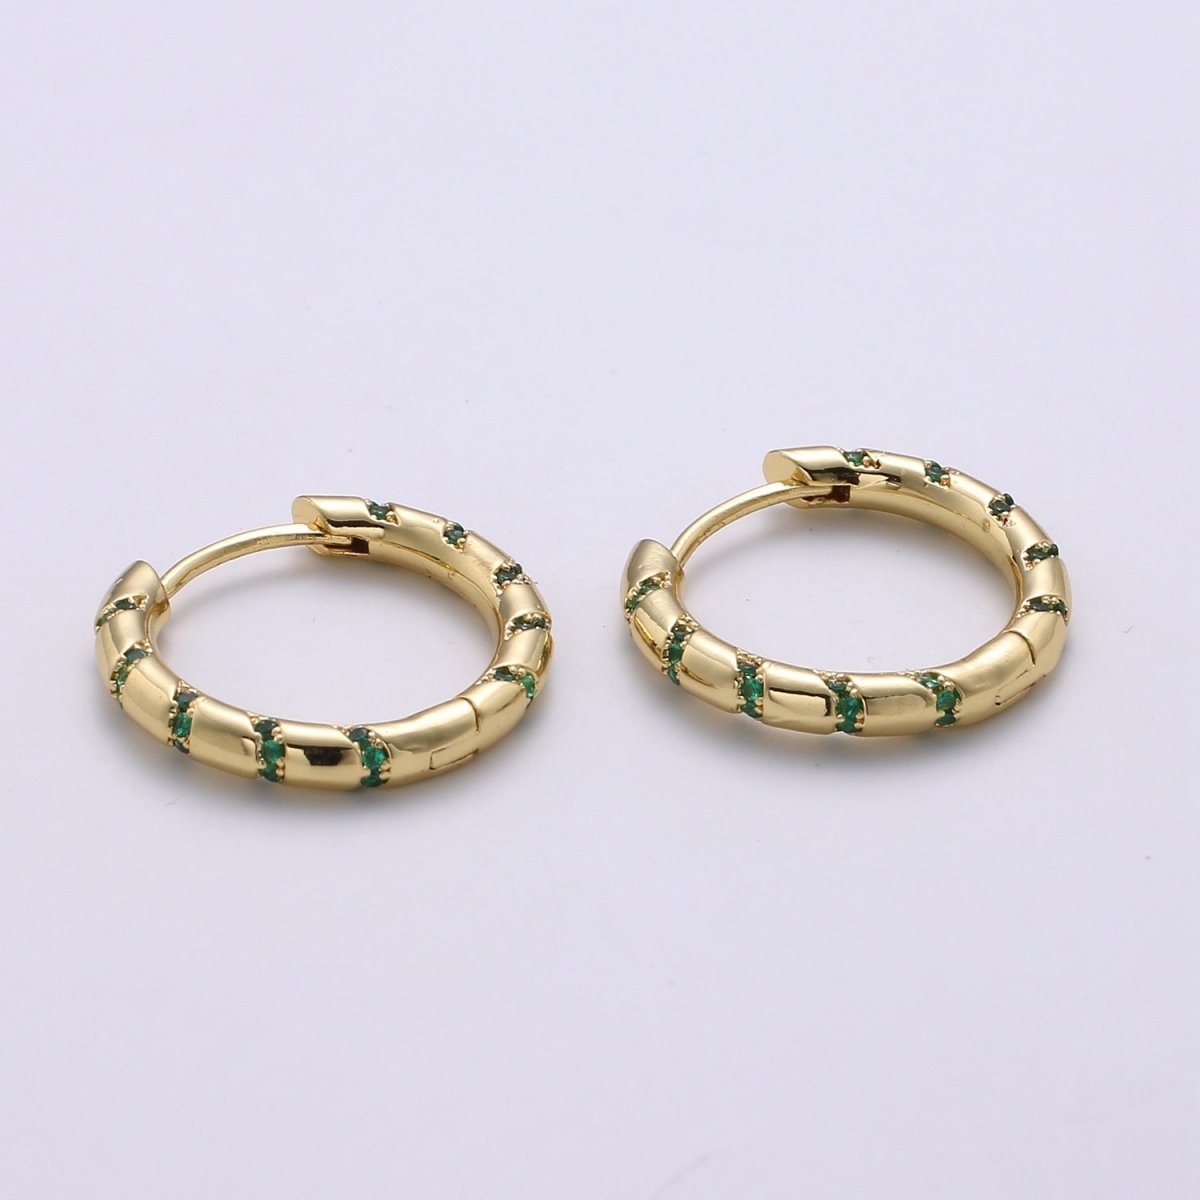 Hoops - Pink, Teal, Blue, Green, Clear, Multi-color Zirconia or White Gold CZ earrings - 24K Gold Huggie hoops Q-355 - Q-361 - DLUXCA